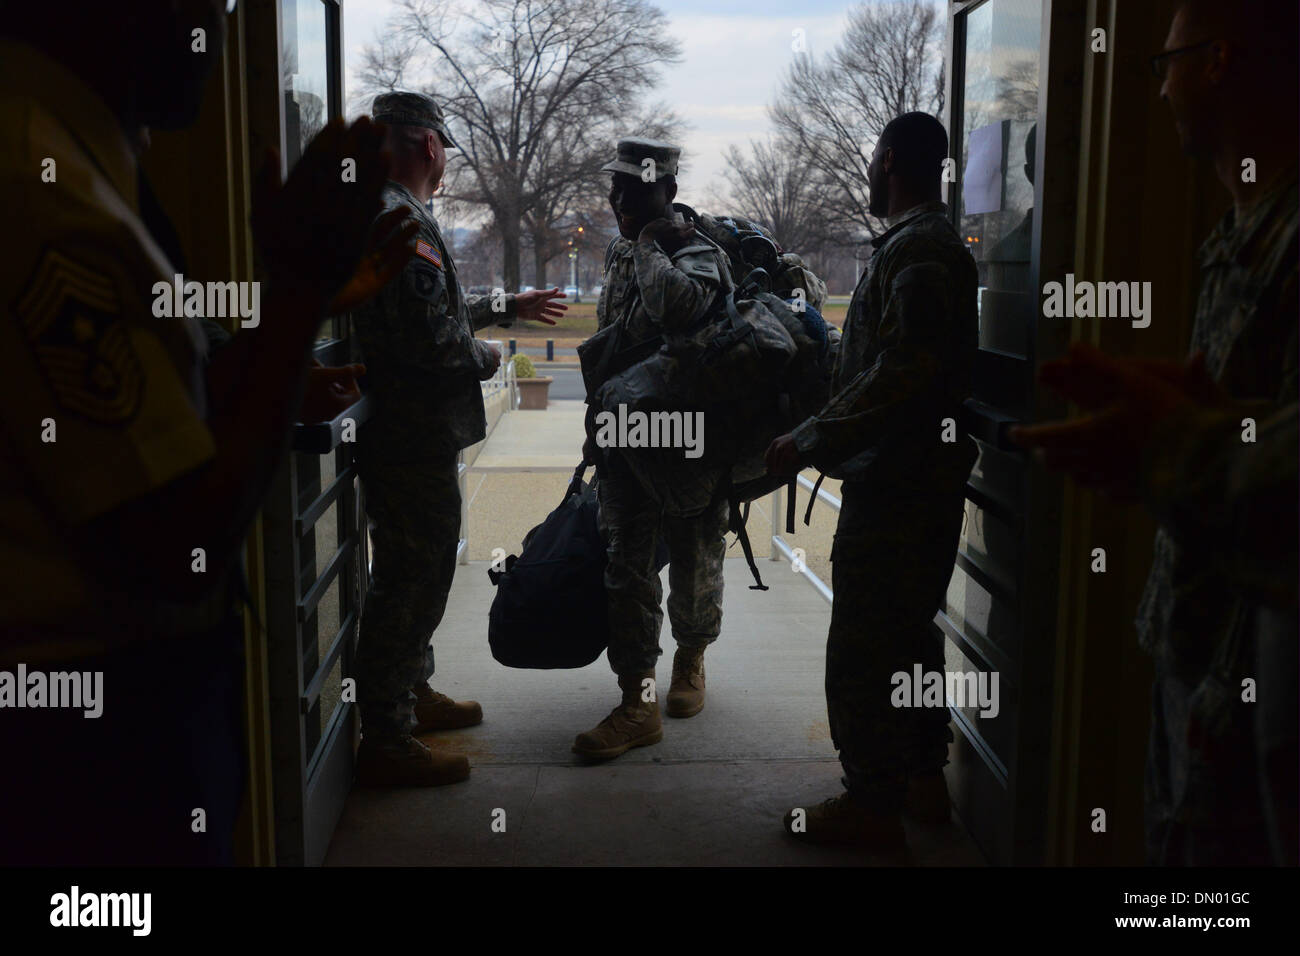 Washington, District of Columbia, US, USA. 17th Dec, 2013. A soldier is welcomed by fellow guardmen at the DC Armory during a homecoming ceremony for nearly 50 soldiers from D.C.'s Army National Guard 372nd Military Police Battalion. The soldiers were returning from a 10-month deployment to Guantanamo Bay, Cuba, in support of Operation Enduring Freedom. Many of the servicemen have deployed at least once previously, and nine work sas police officers while not on military duty. Credit:  Miguel Juarez Lugo/ZUMAPRESS.com/Alamy Live News Stock Photo